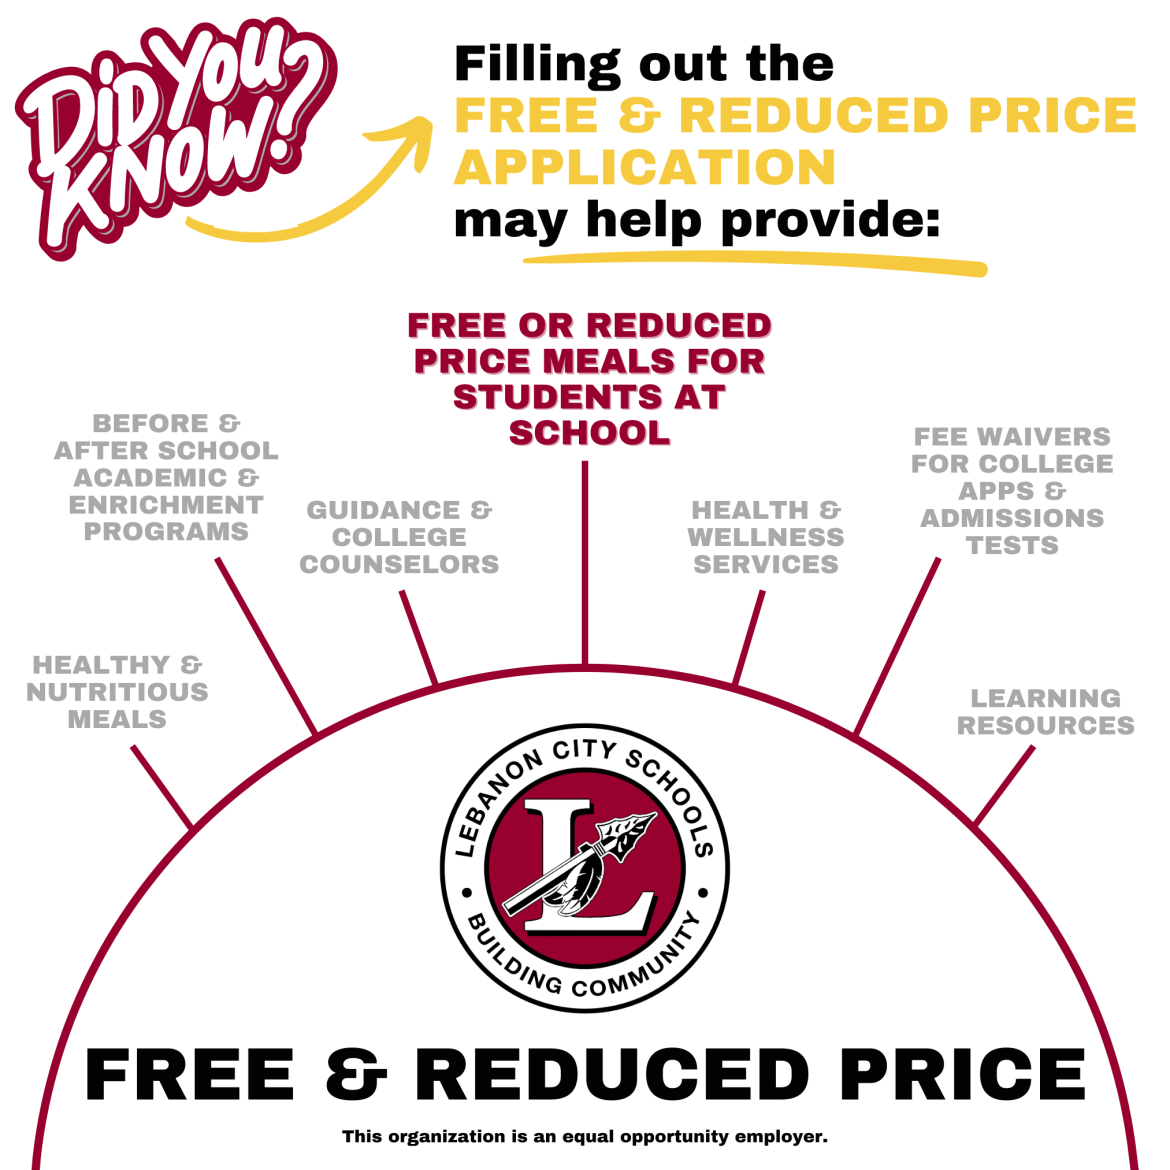 FREE AND REDUCED PRICE INFORMATION